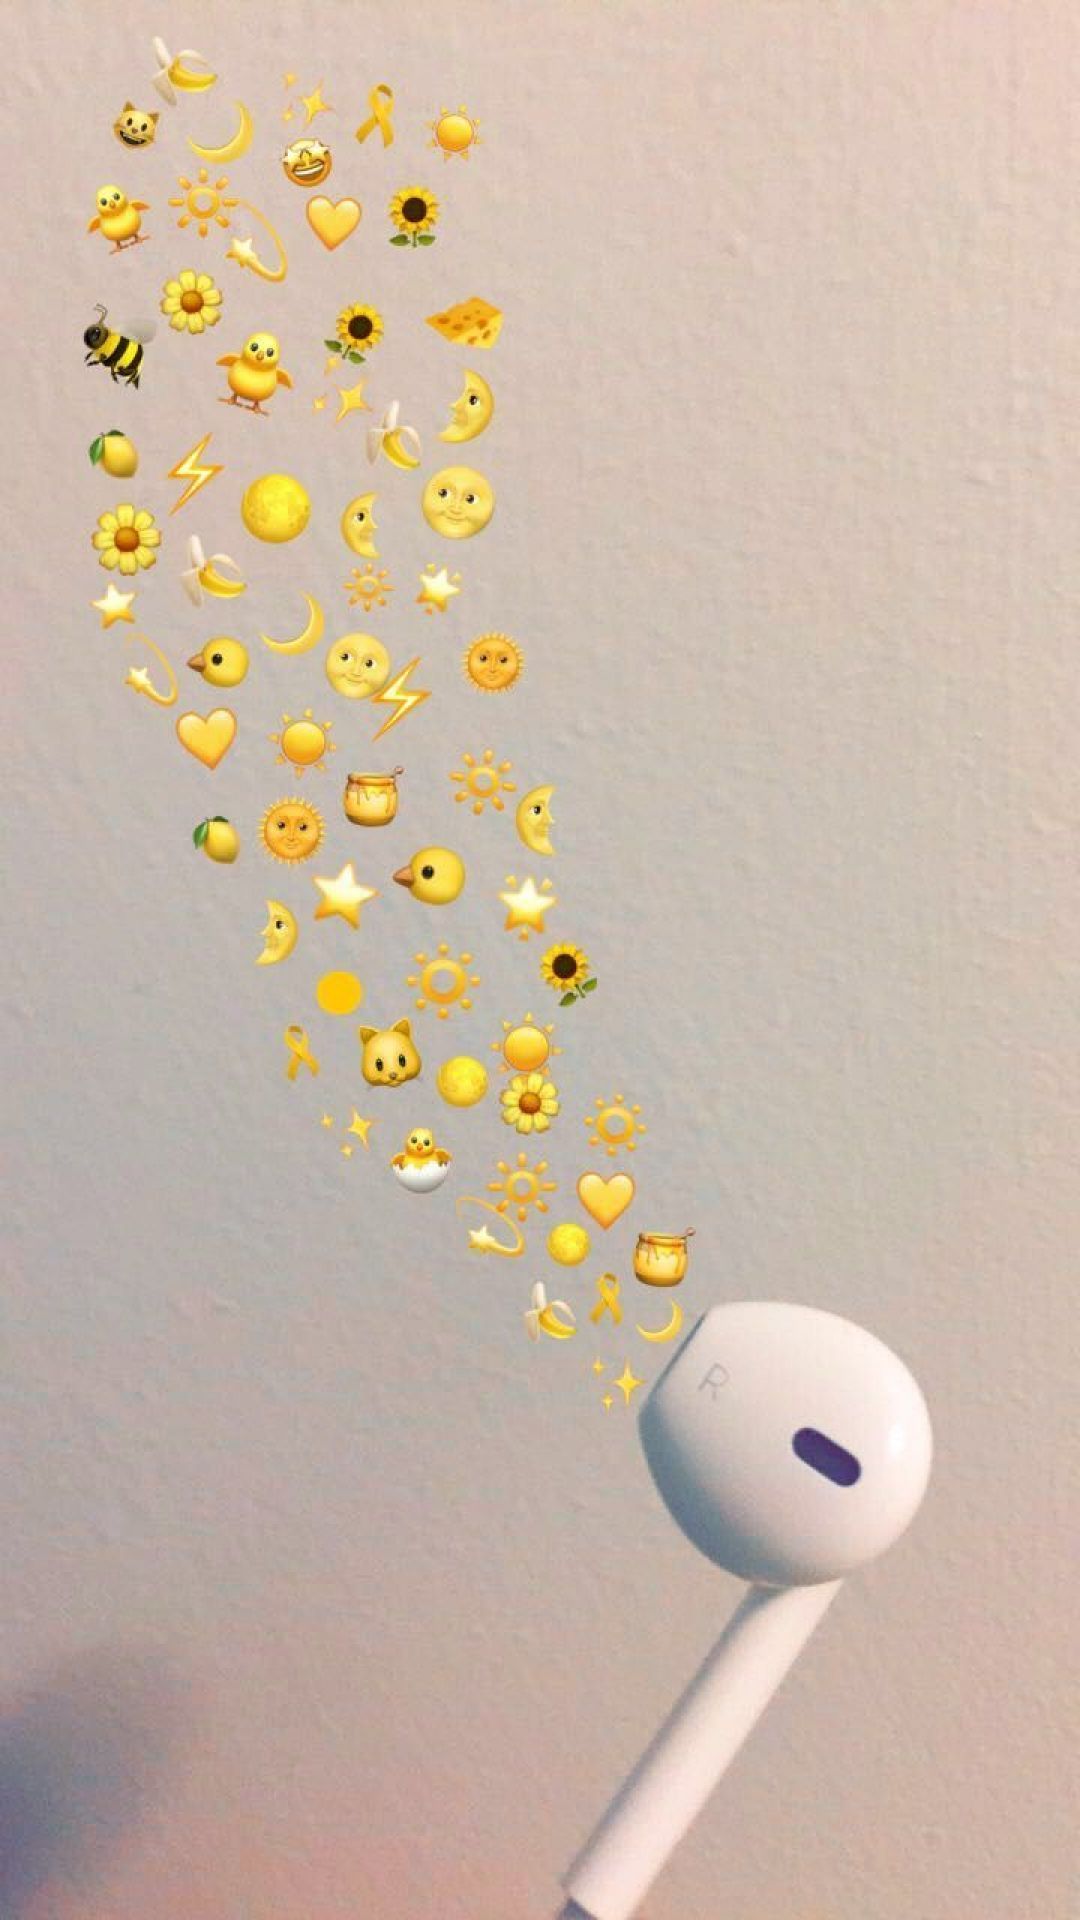 A picture of a white earphone with emojis flying out of it - Emoji